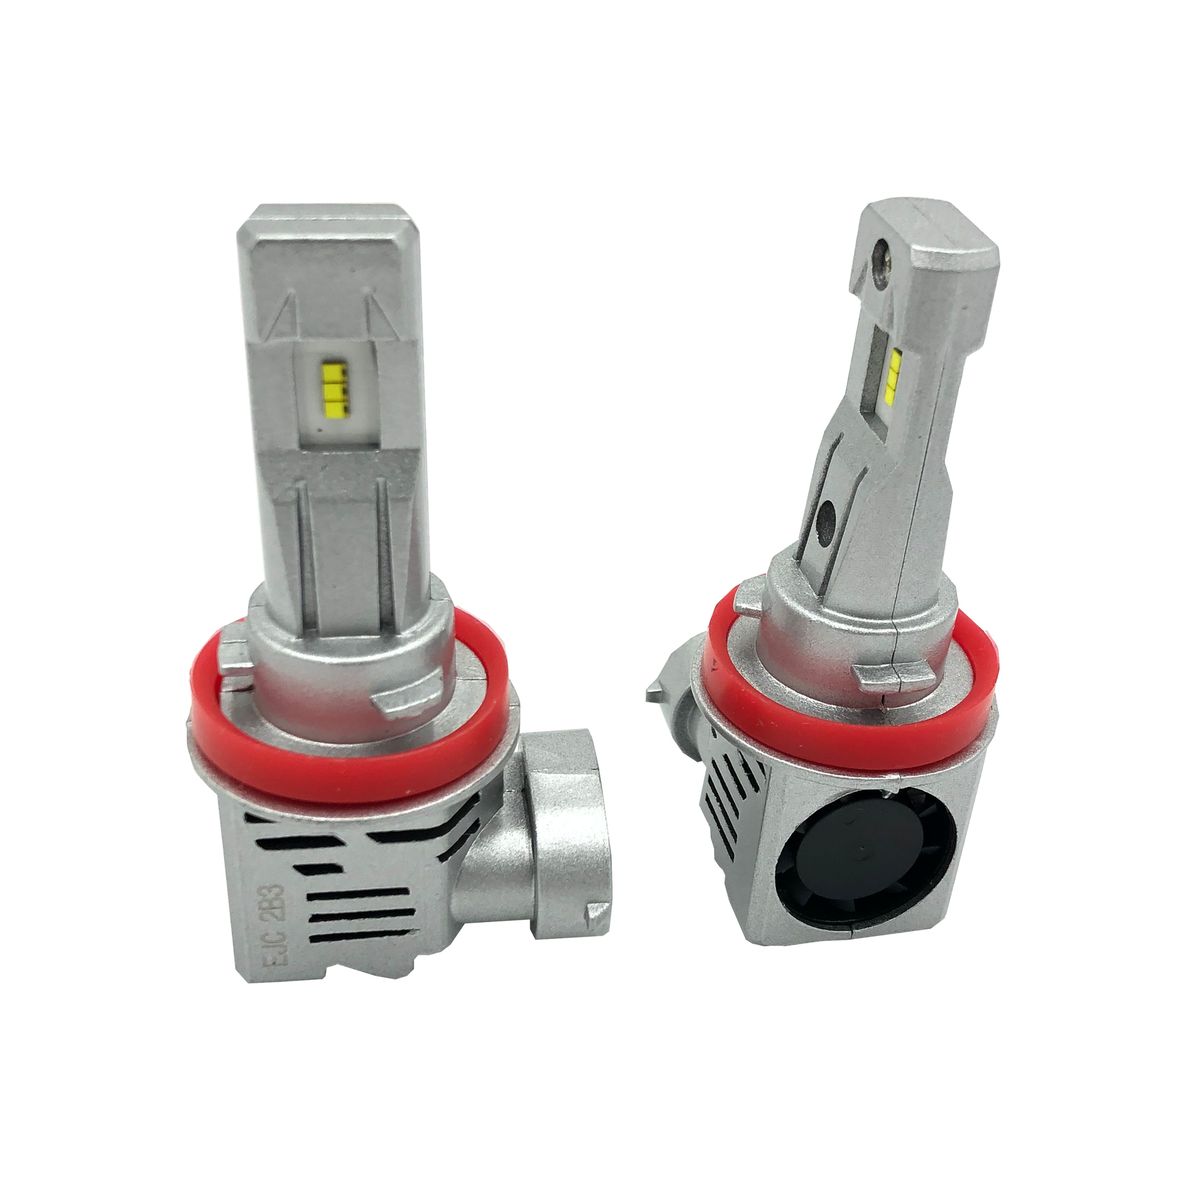 Super Bright 200W 15000LM H11 Vehicle LED Headlights, Shop Today. Get it  Tomorrow!